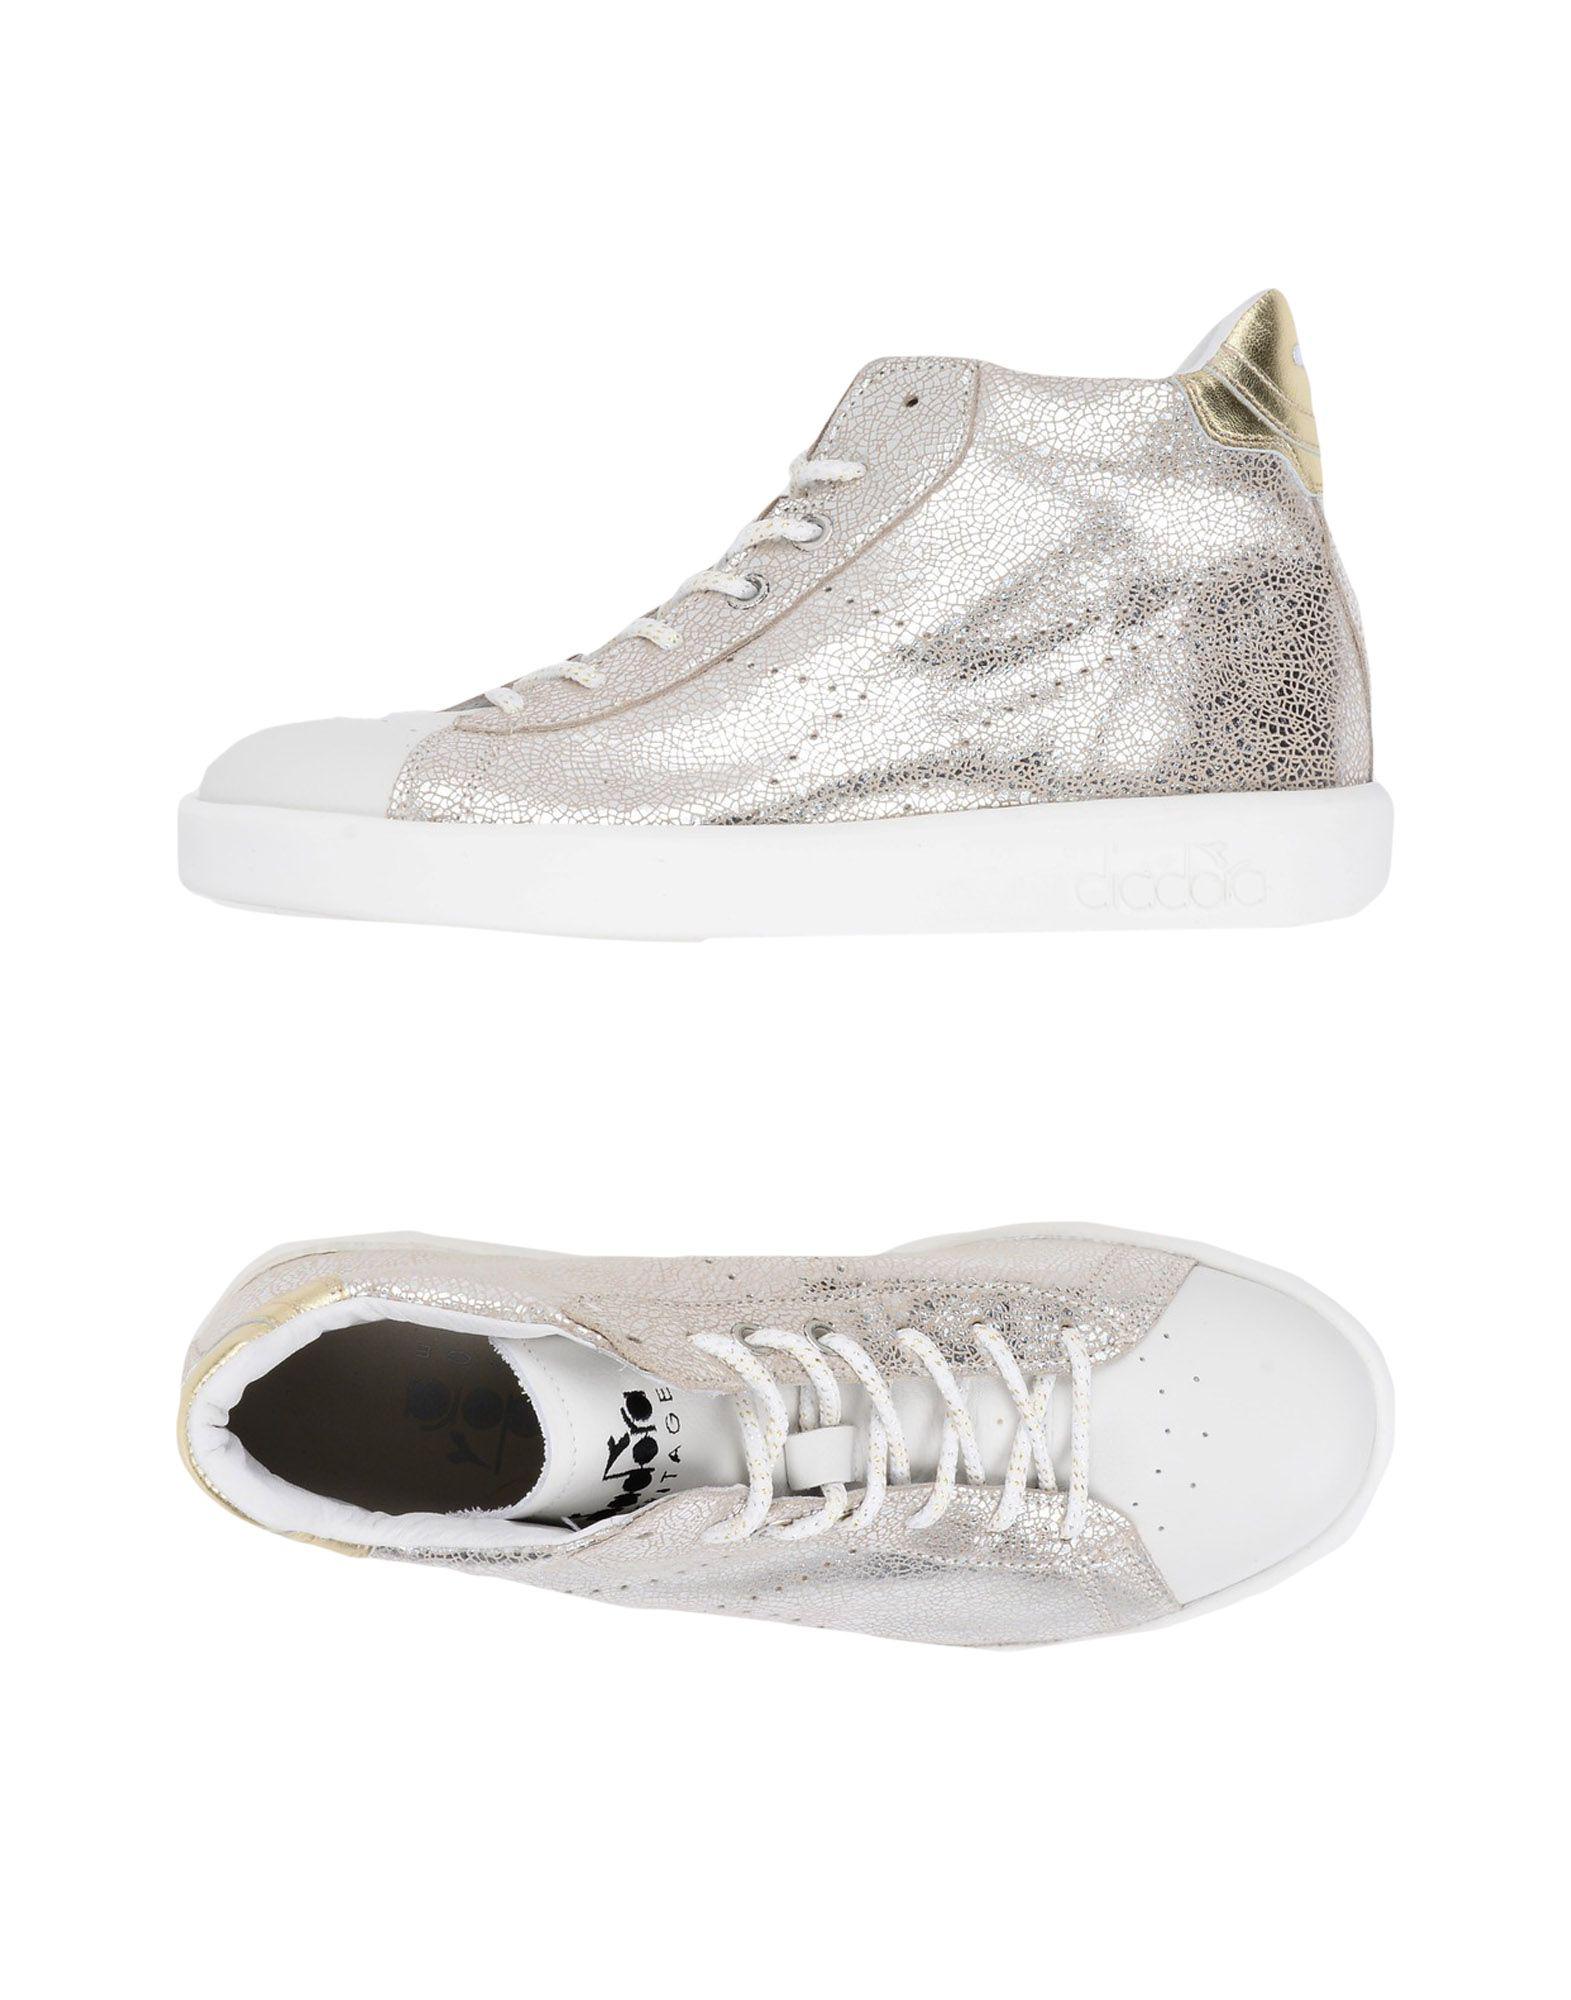 Diadora Leather High-tops & Sneakers in Silver (Metallic) - Lyst